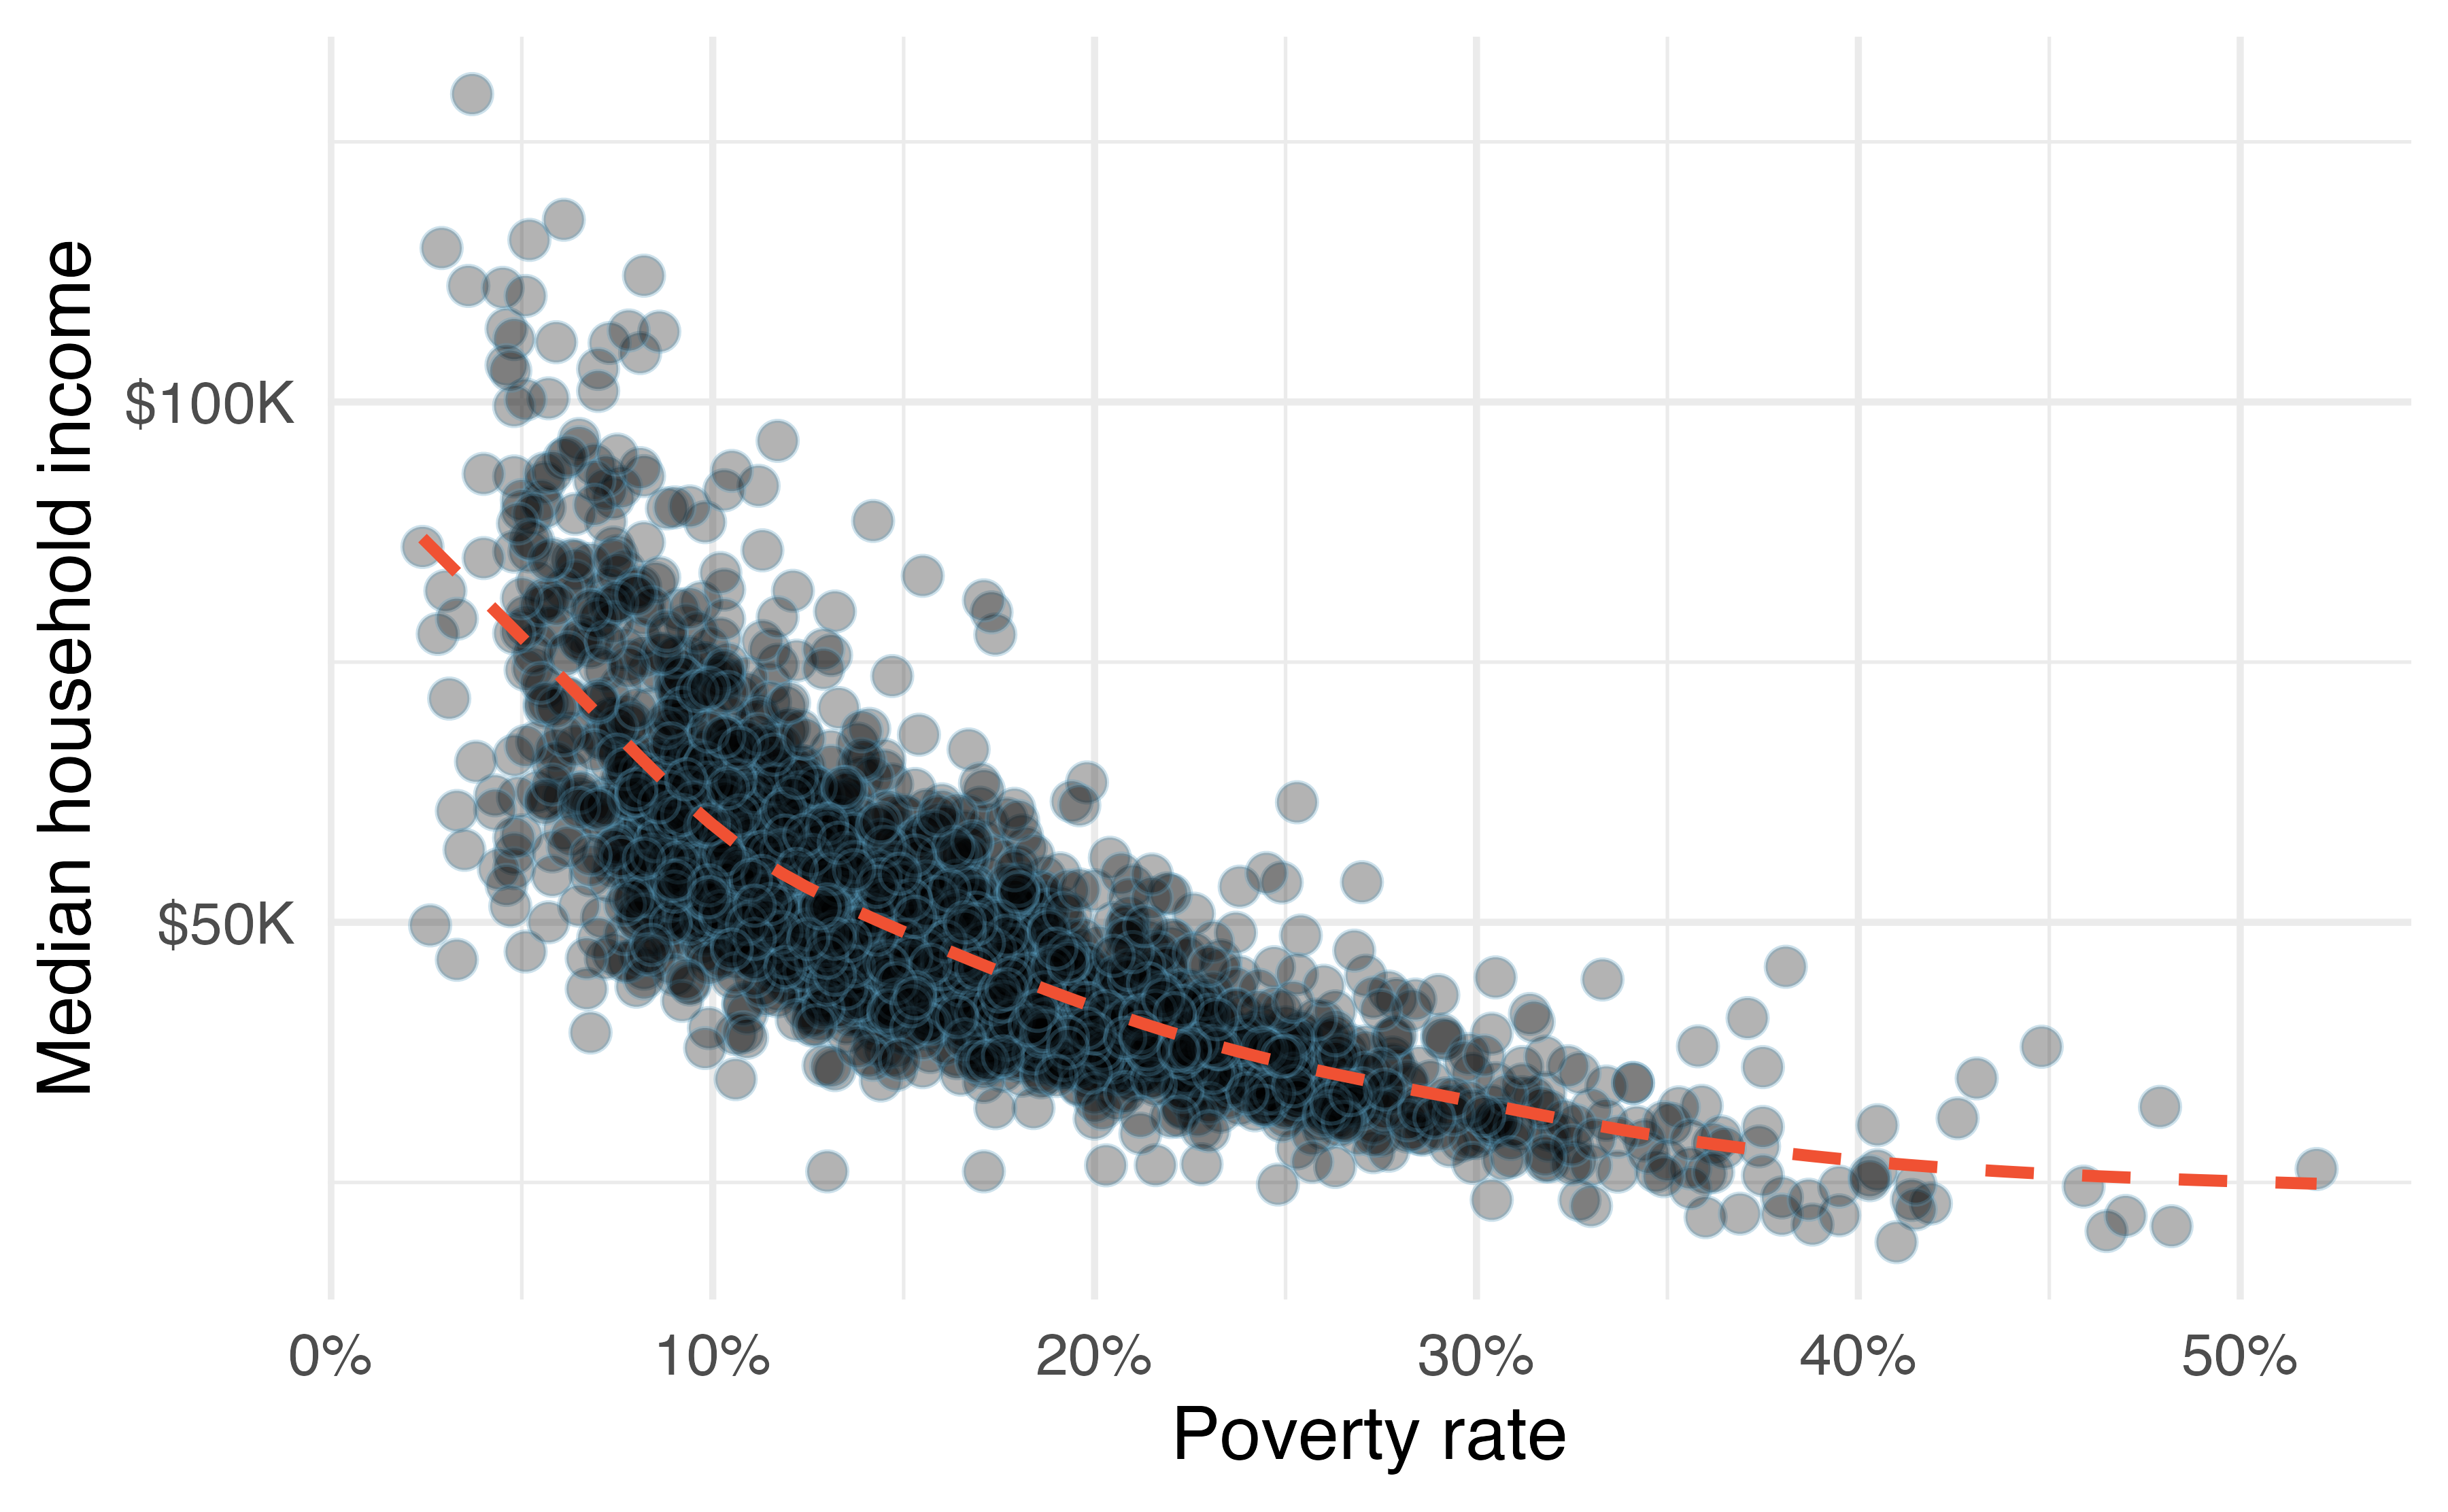 A scatterplot of the median household income against the poverty rate for the county dataset. Data are from 2017. A statistical model has also been fit to the data and is shown as a dashed line.